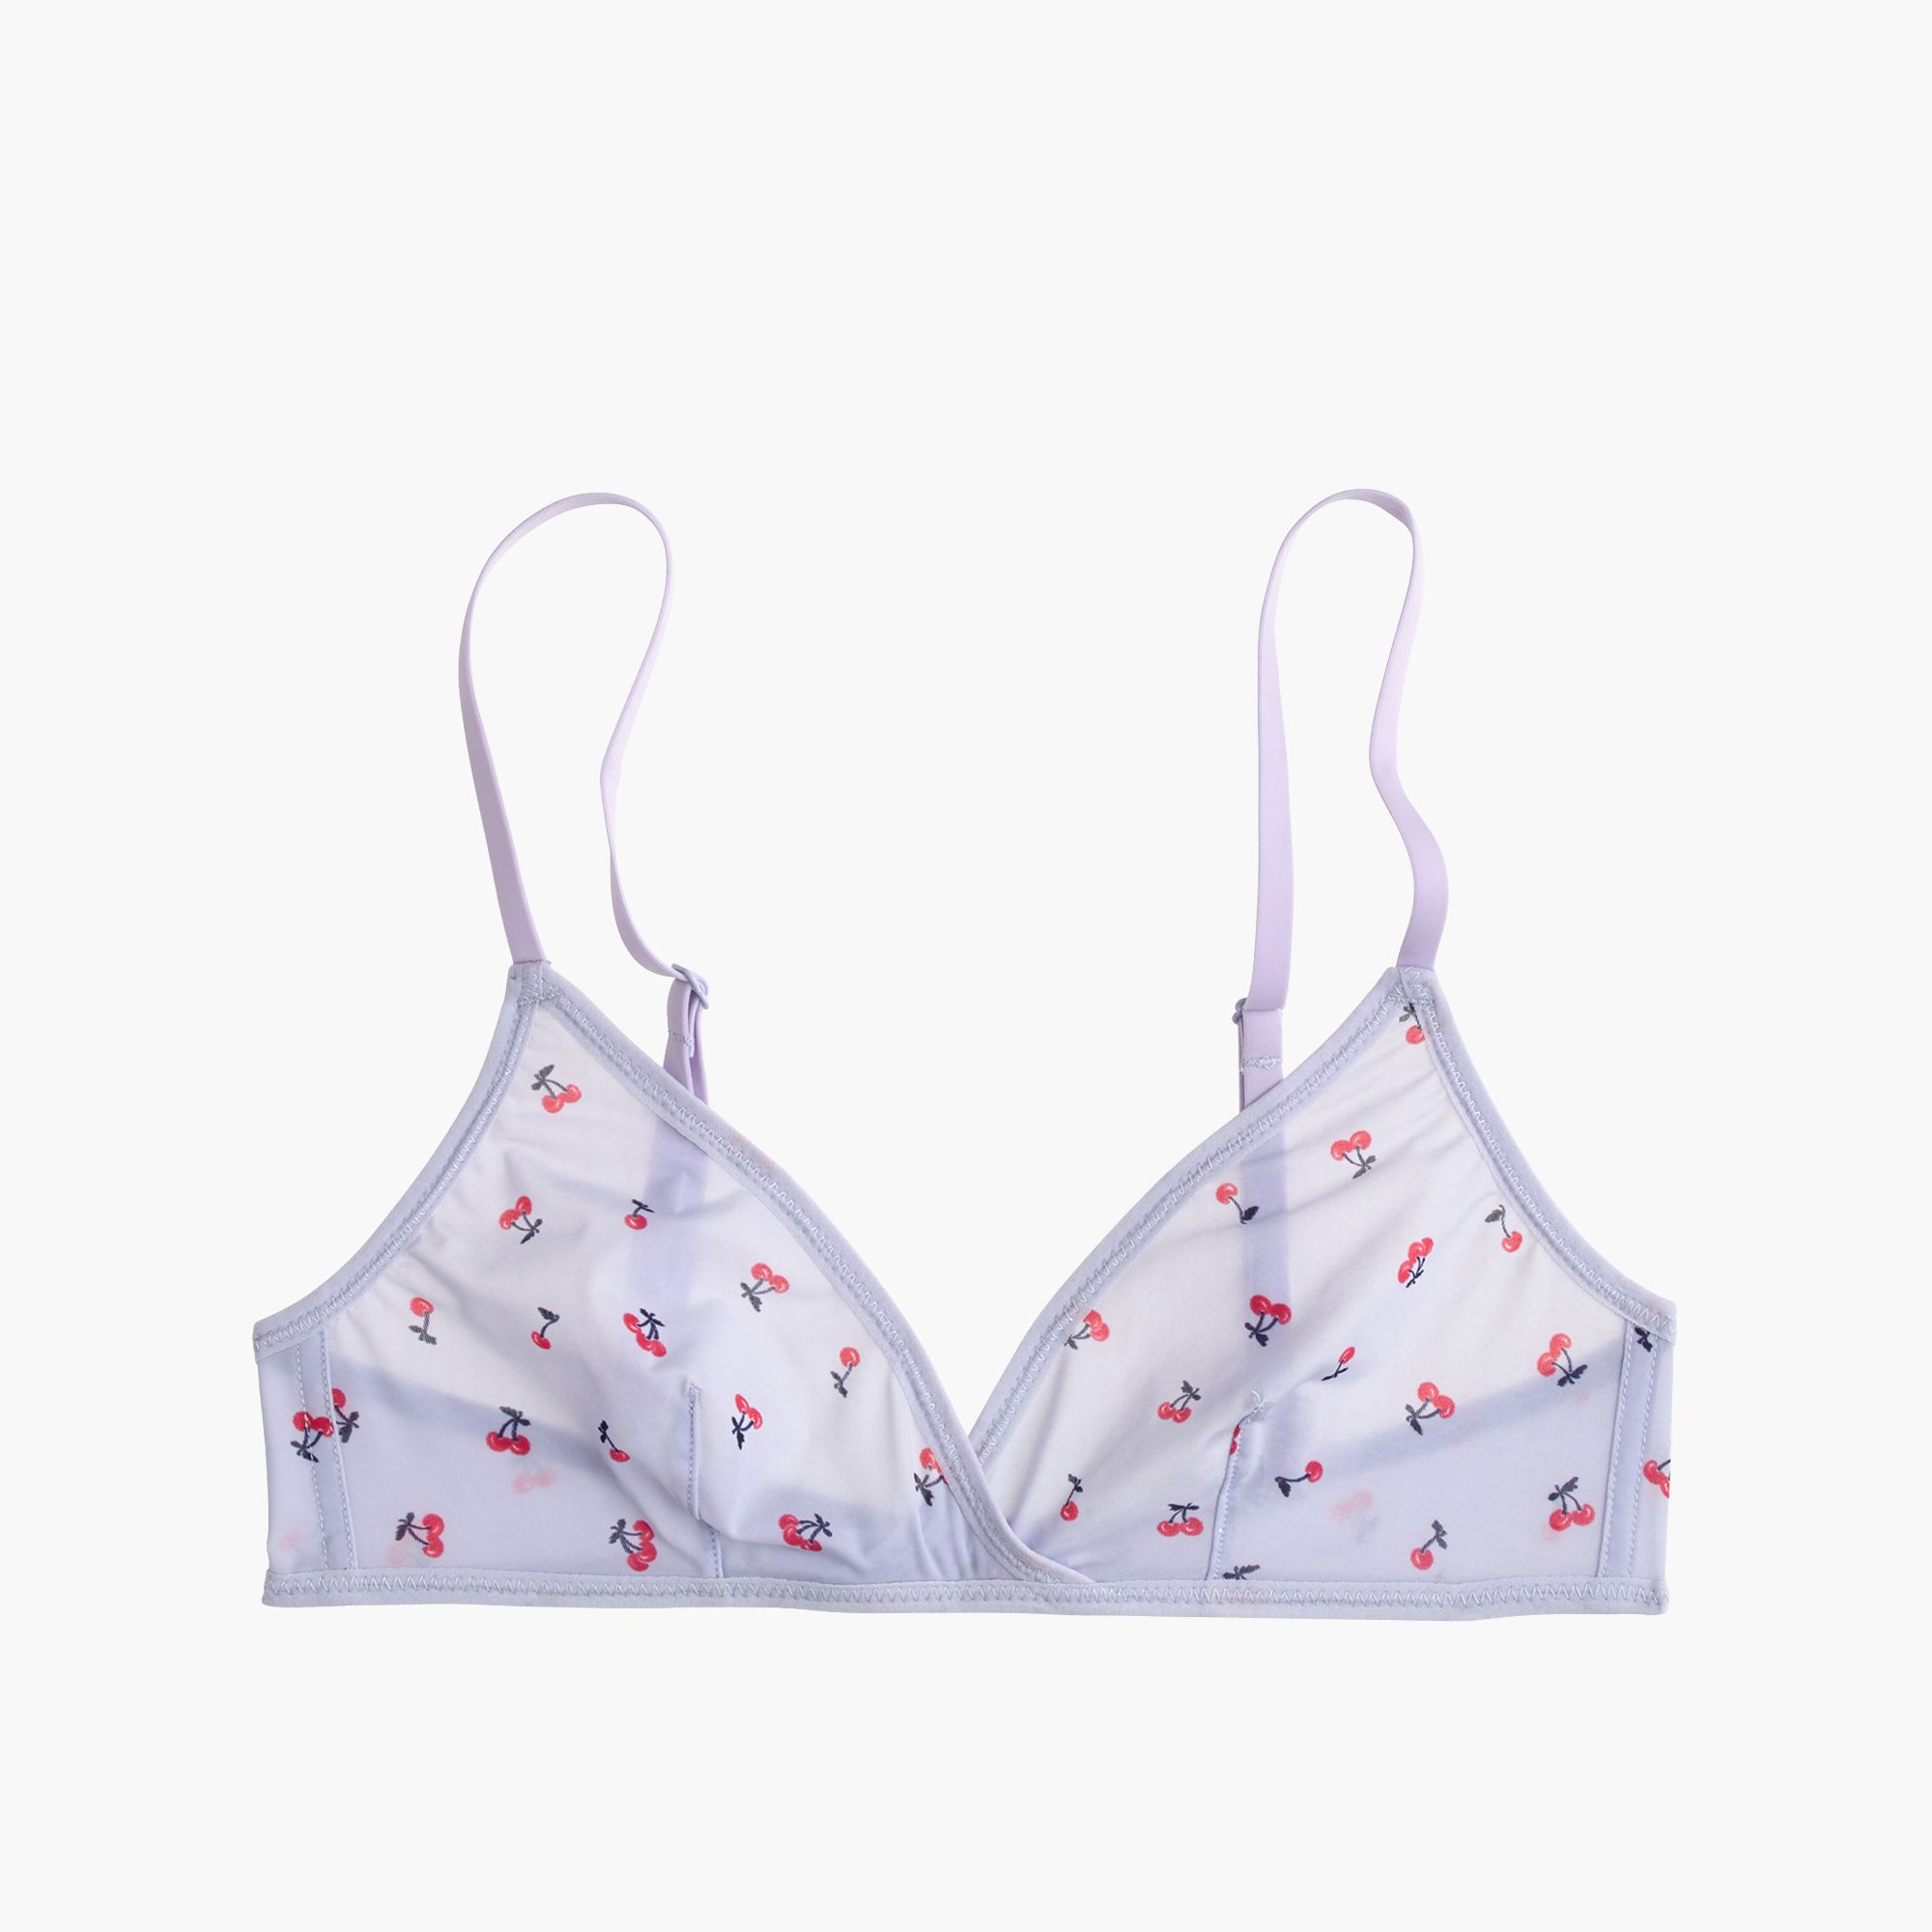 j.crew’s new lingerie collection is bralette heaven